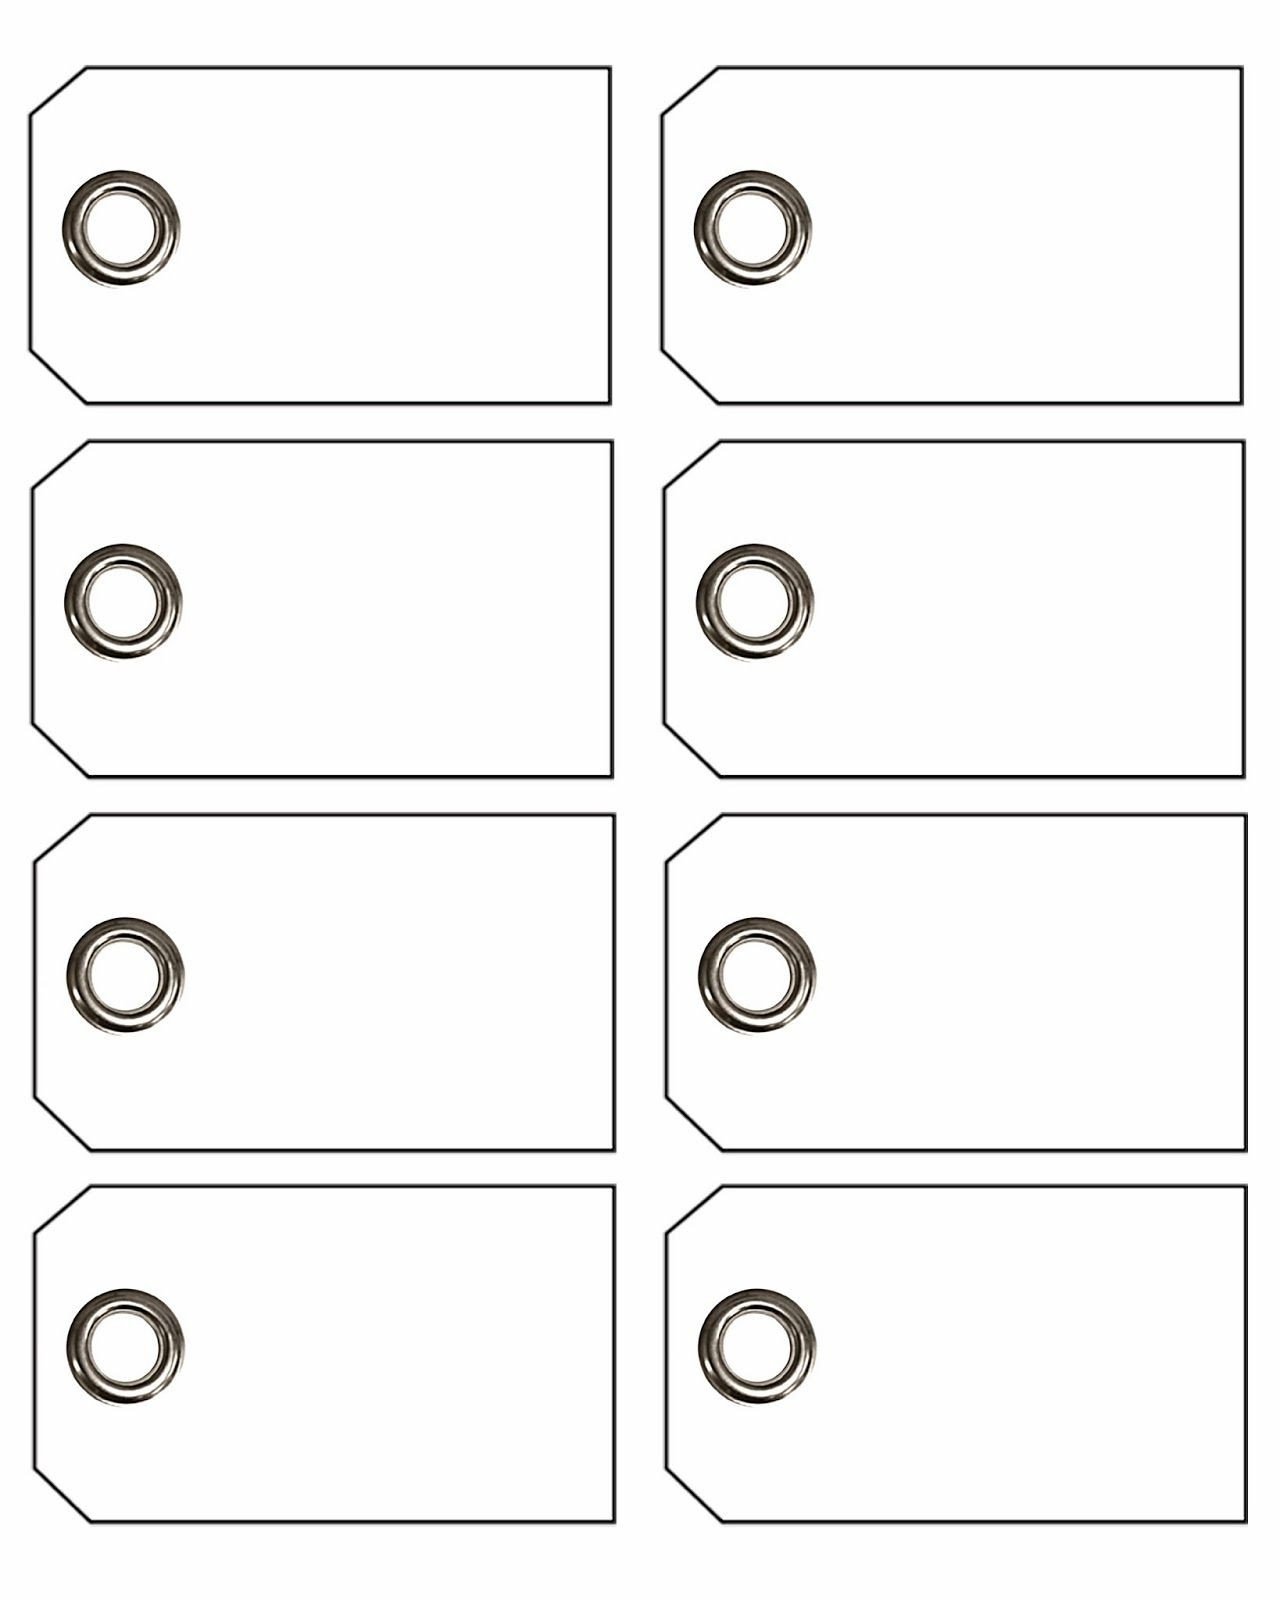 Free Printable Price Tags Template Blank Price Tags Printable Gift Tags with Eyelets S3rfbuxr